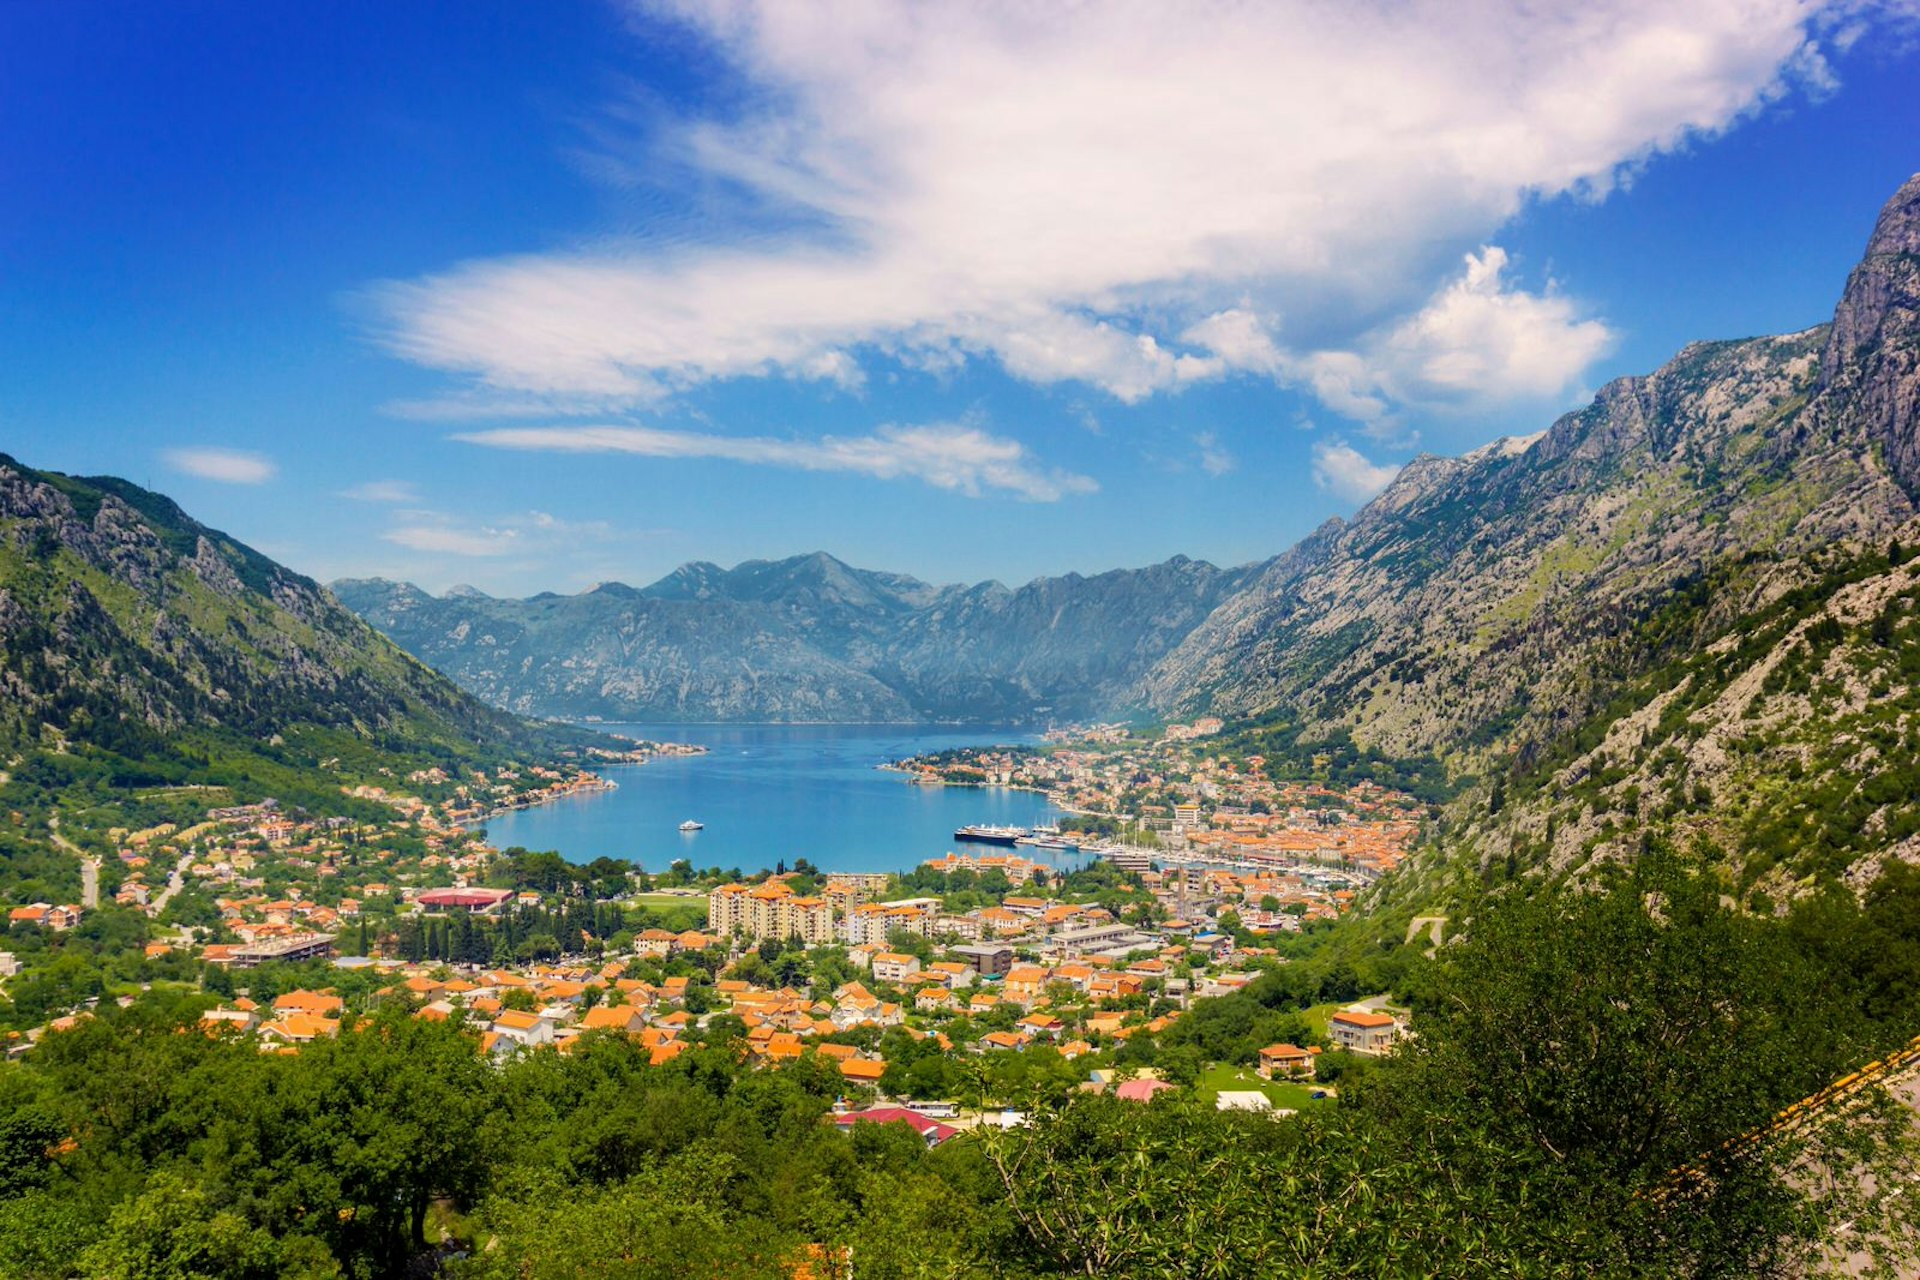 The dramatic Bay of Kotor: a blue inlet is surrounded by the orange roofs of Kotor Town with the whole scene fenced in by jagged rocky peaks.